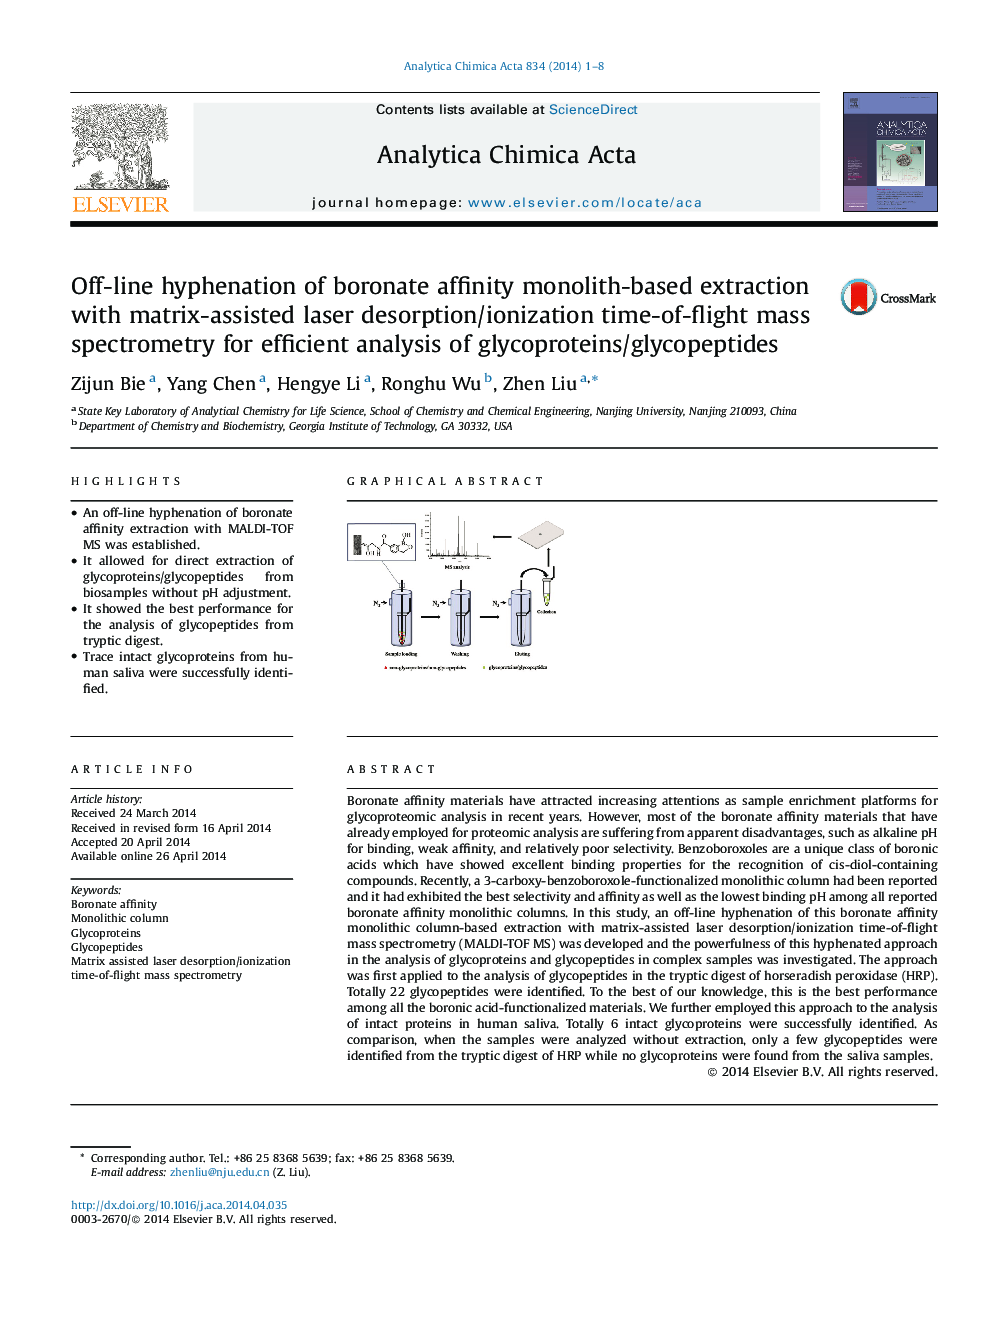 Off-line hyphenation of boronate affinity monolith-based extraction with matrix-assisted laser desorption/ionization time-of-flight mass spectrometry for efficient analysis of glycoproteins/glycopeptides